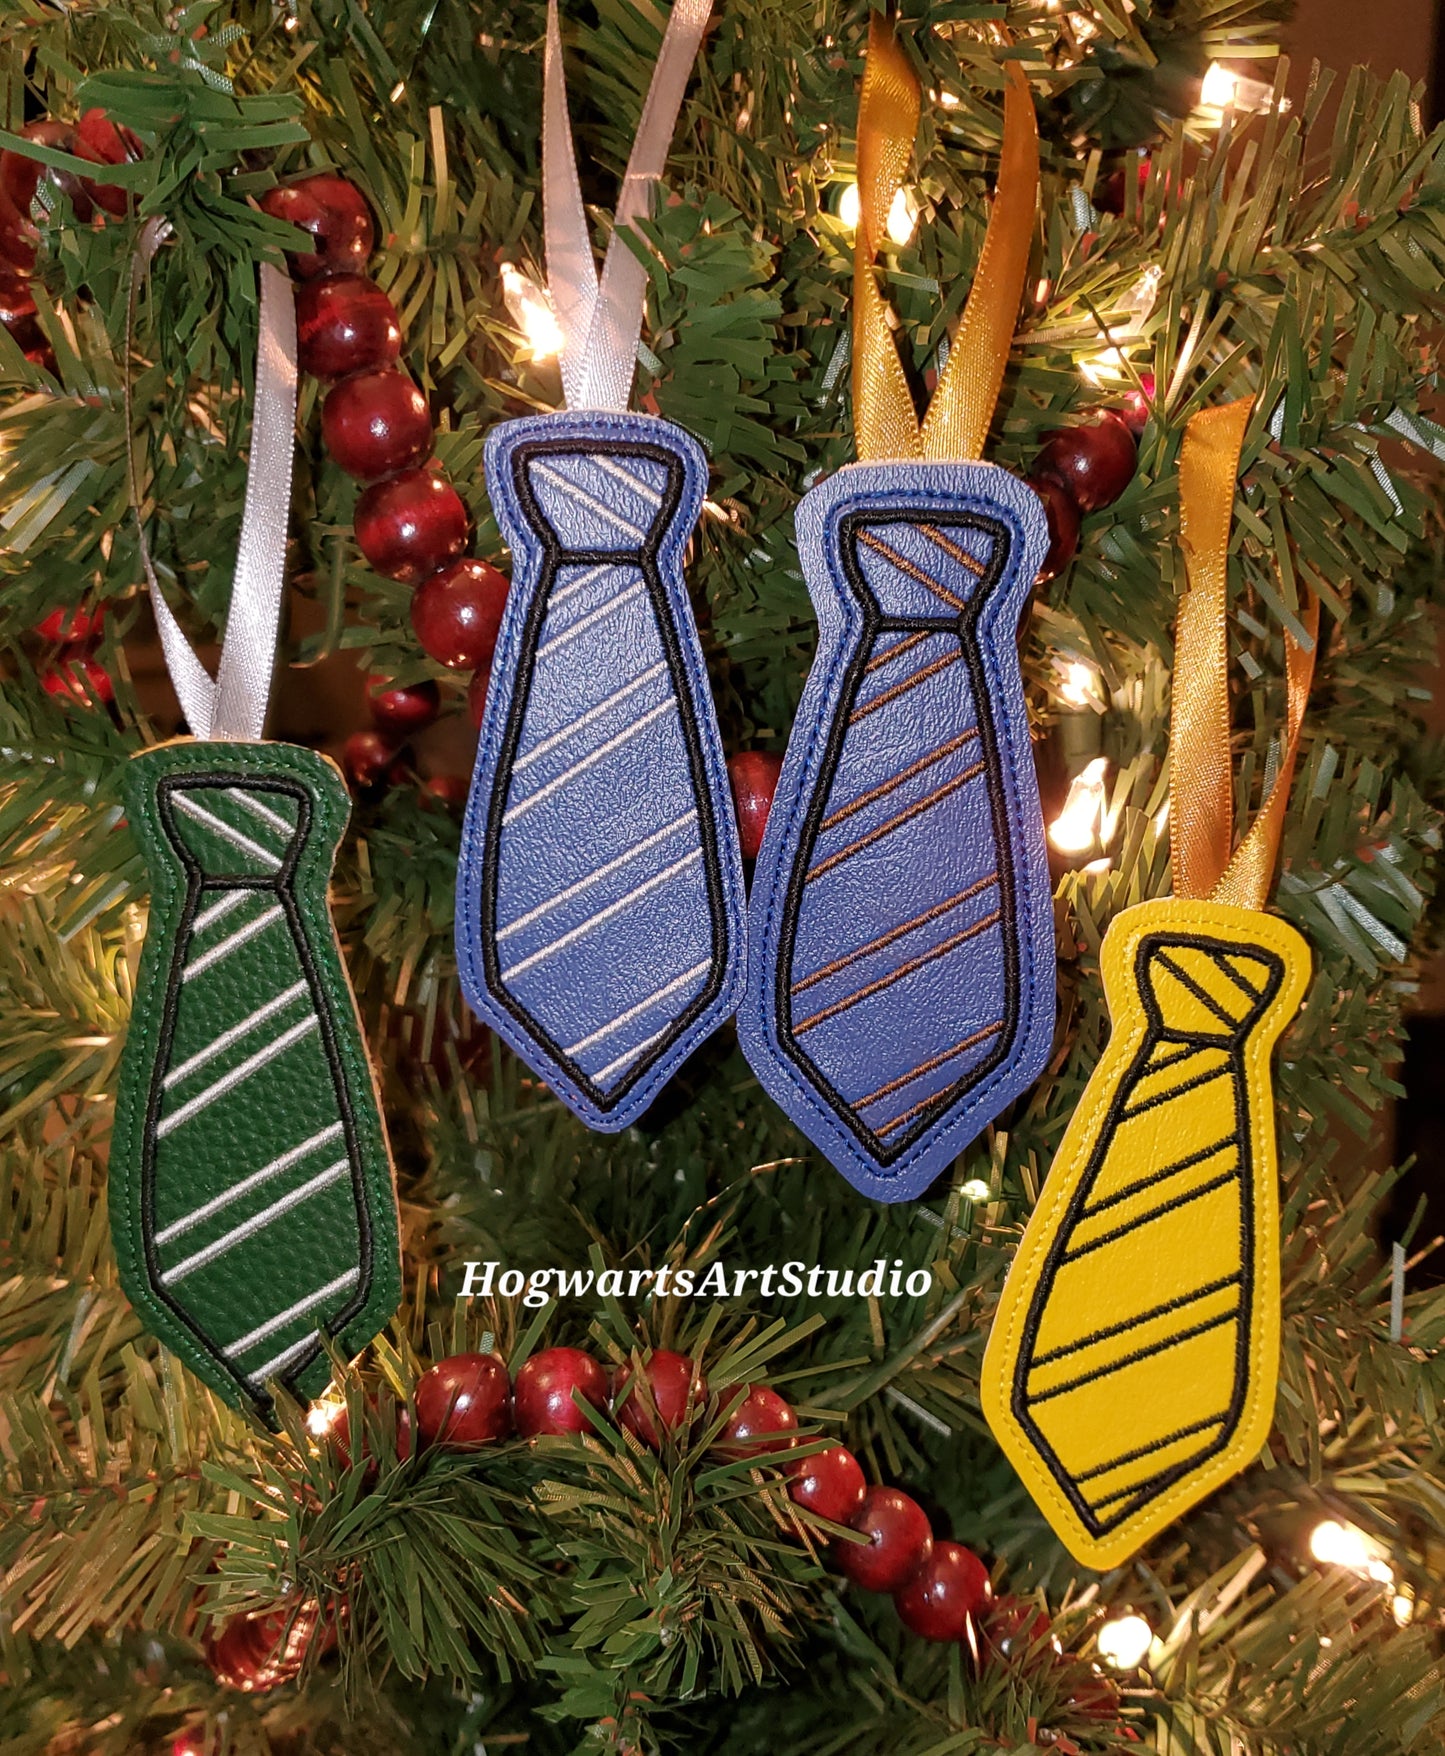 Striped House Tie Ornament - A fun ornament for your tree, or anywhere!